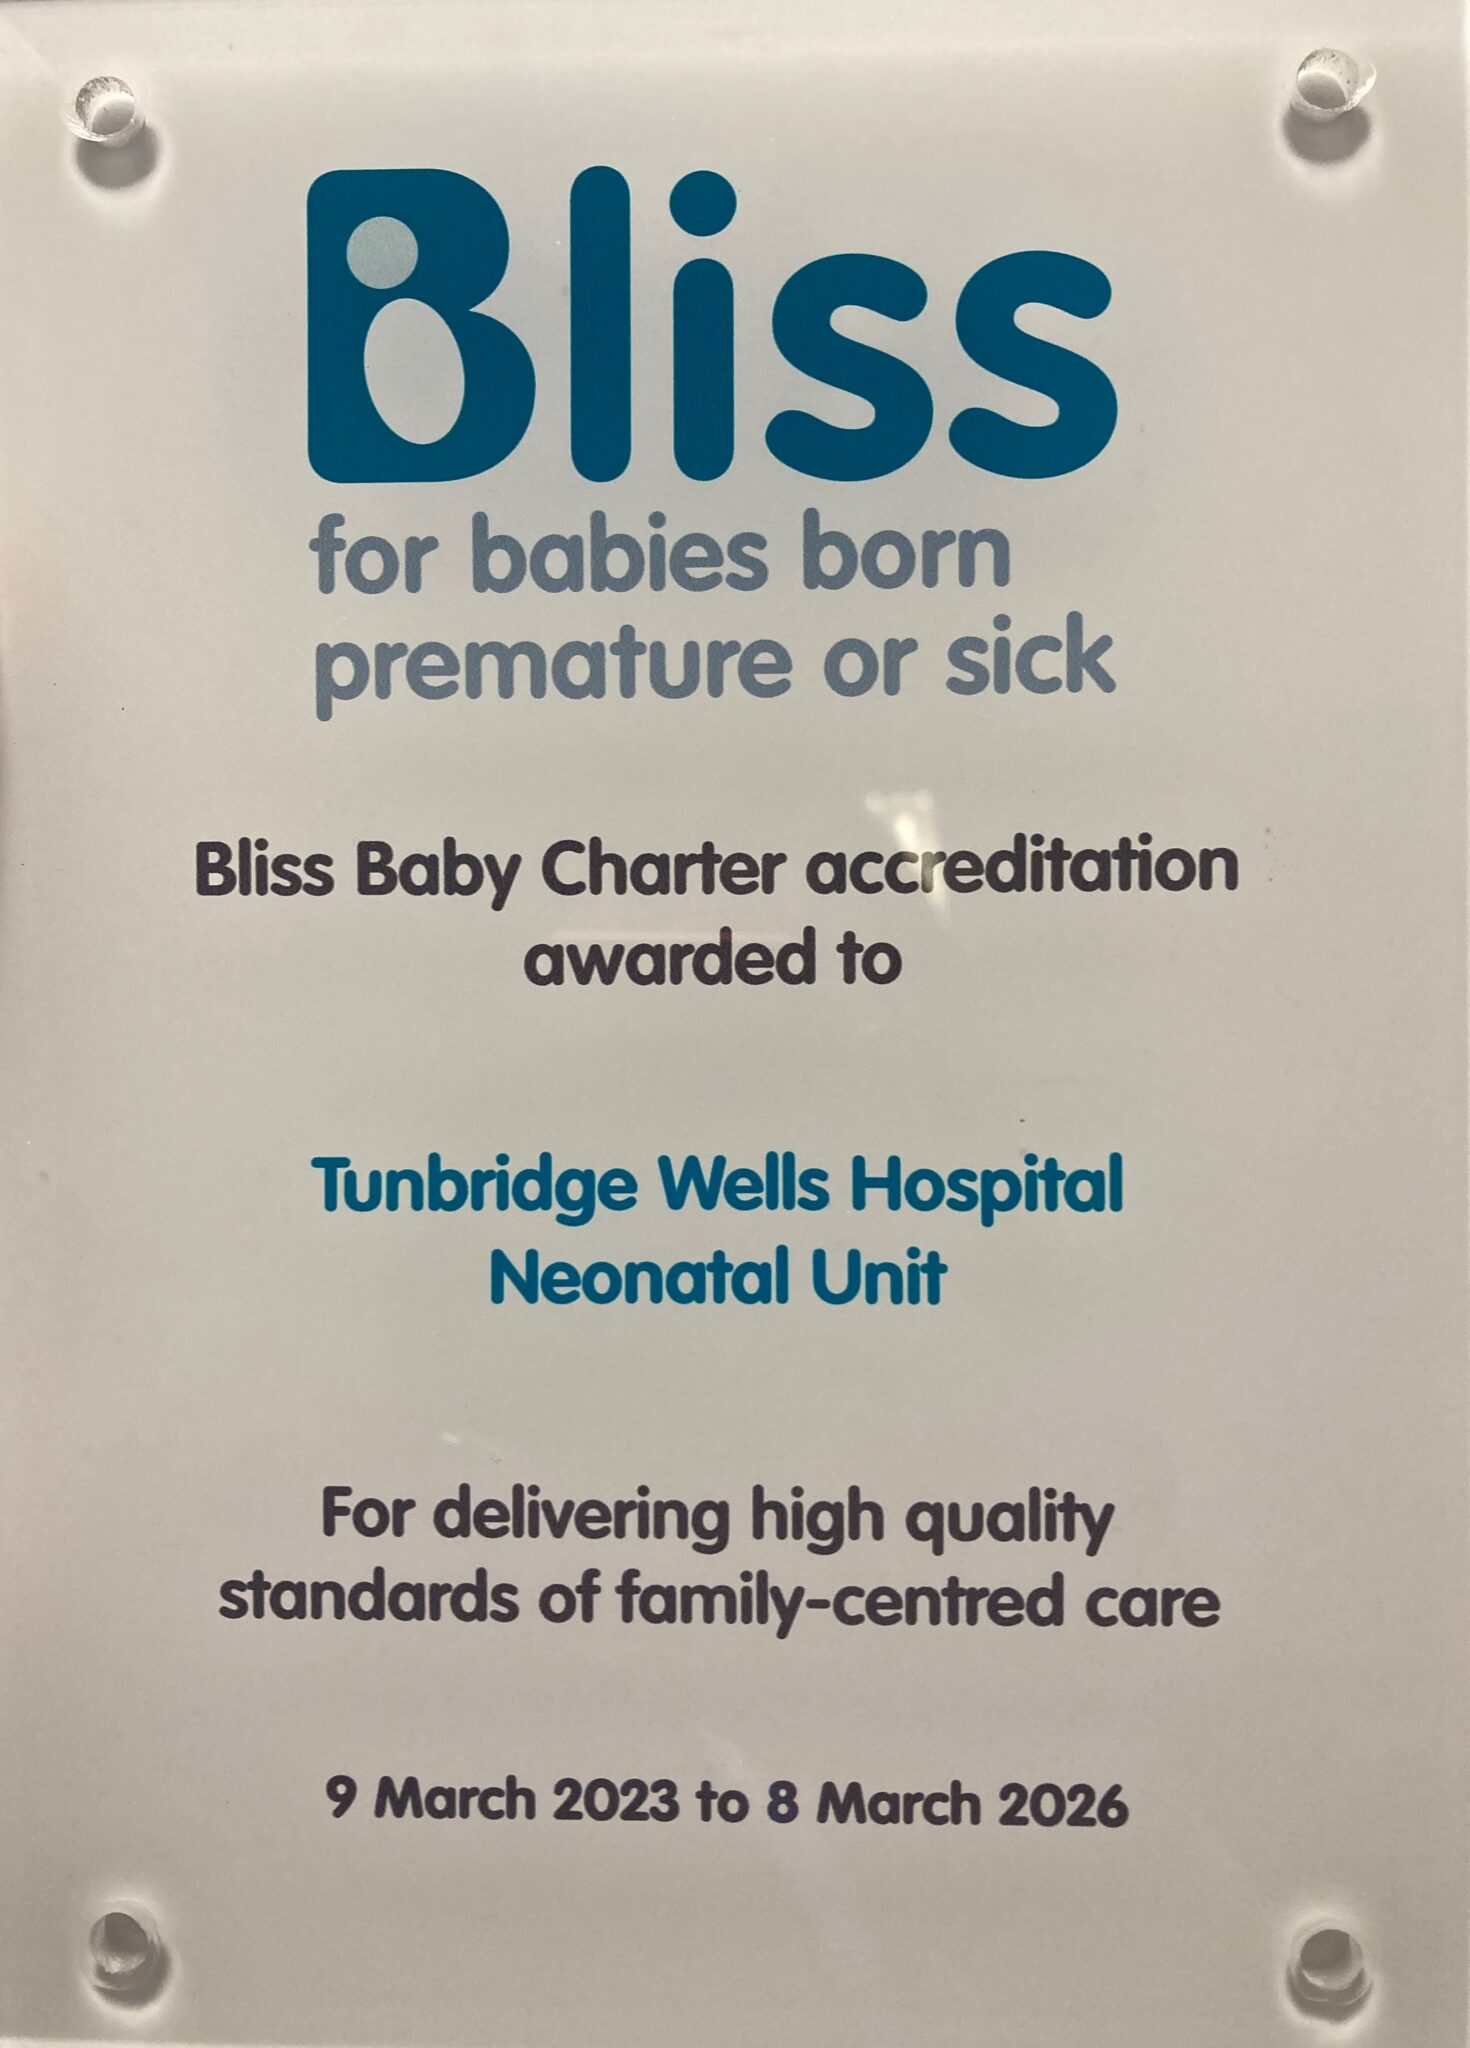 Platinum Bliss Baby Charter accreditation for Neonatal unit Maidstone